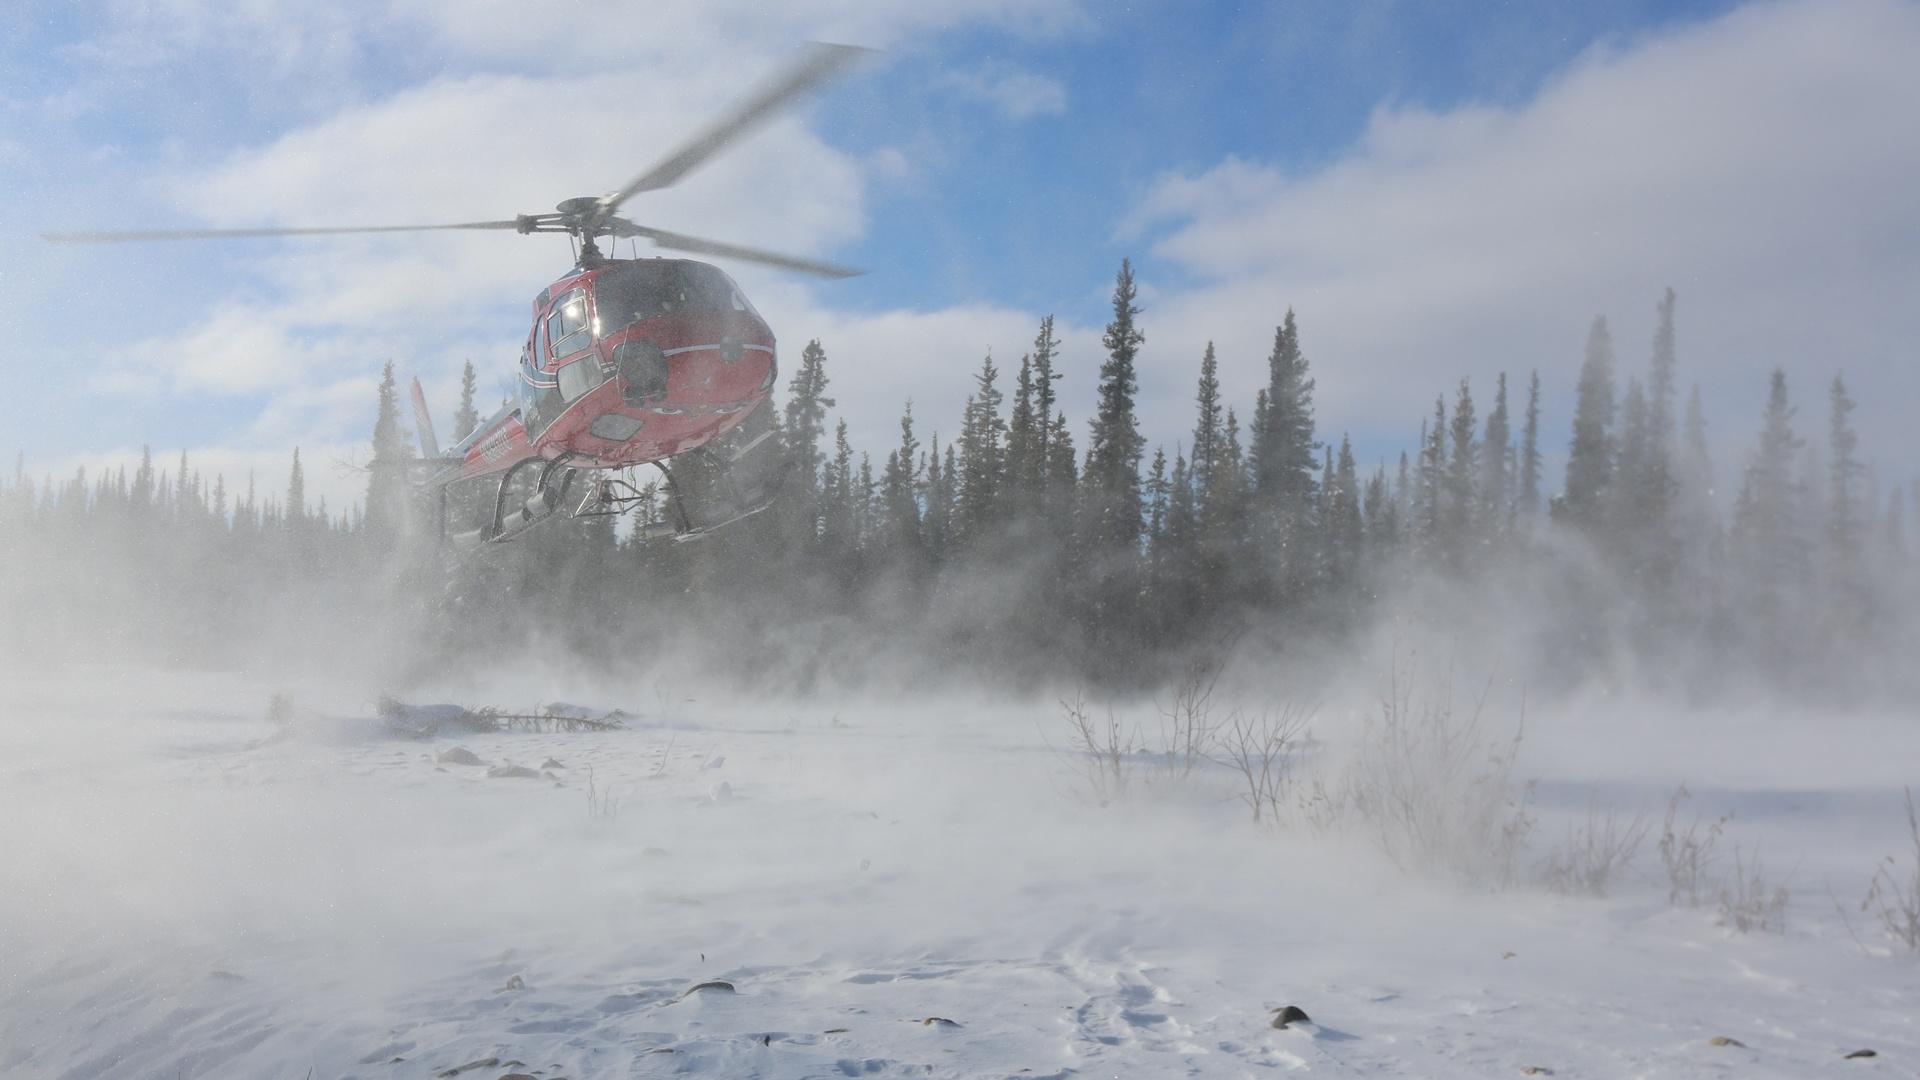 Image of helicopter landing in snow.